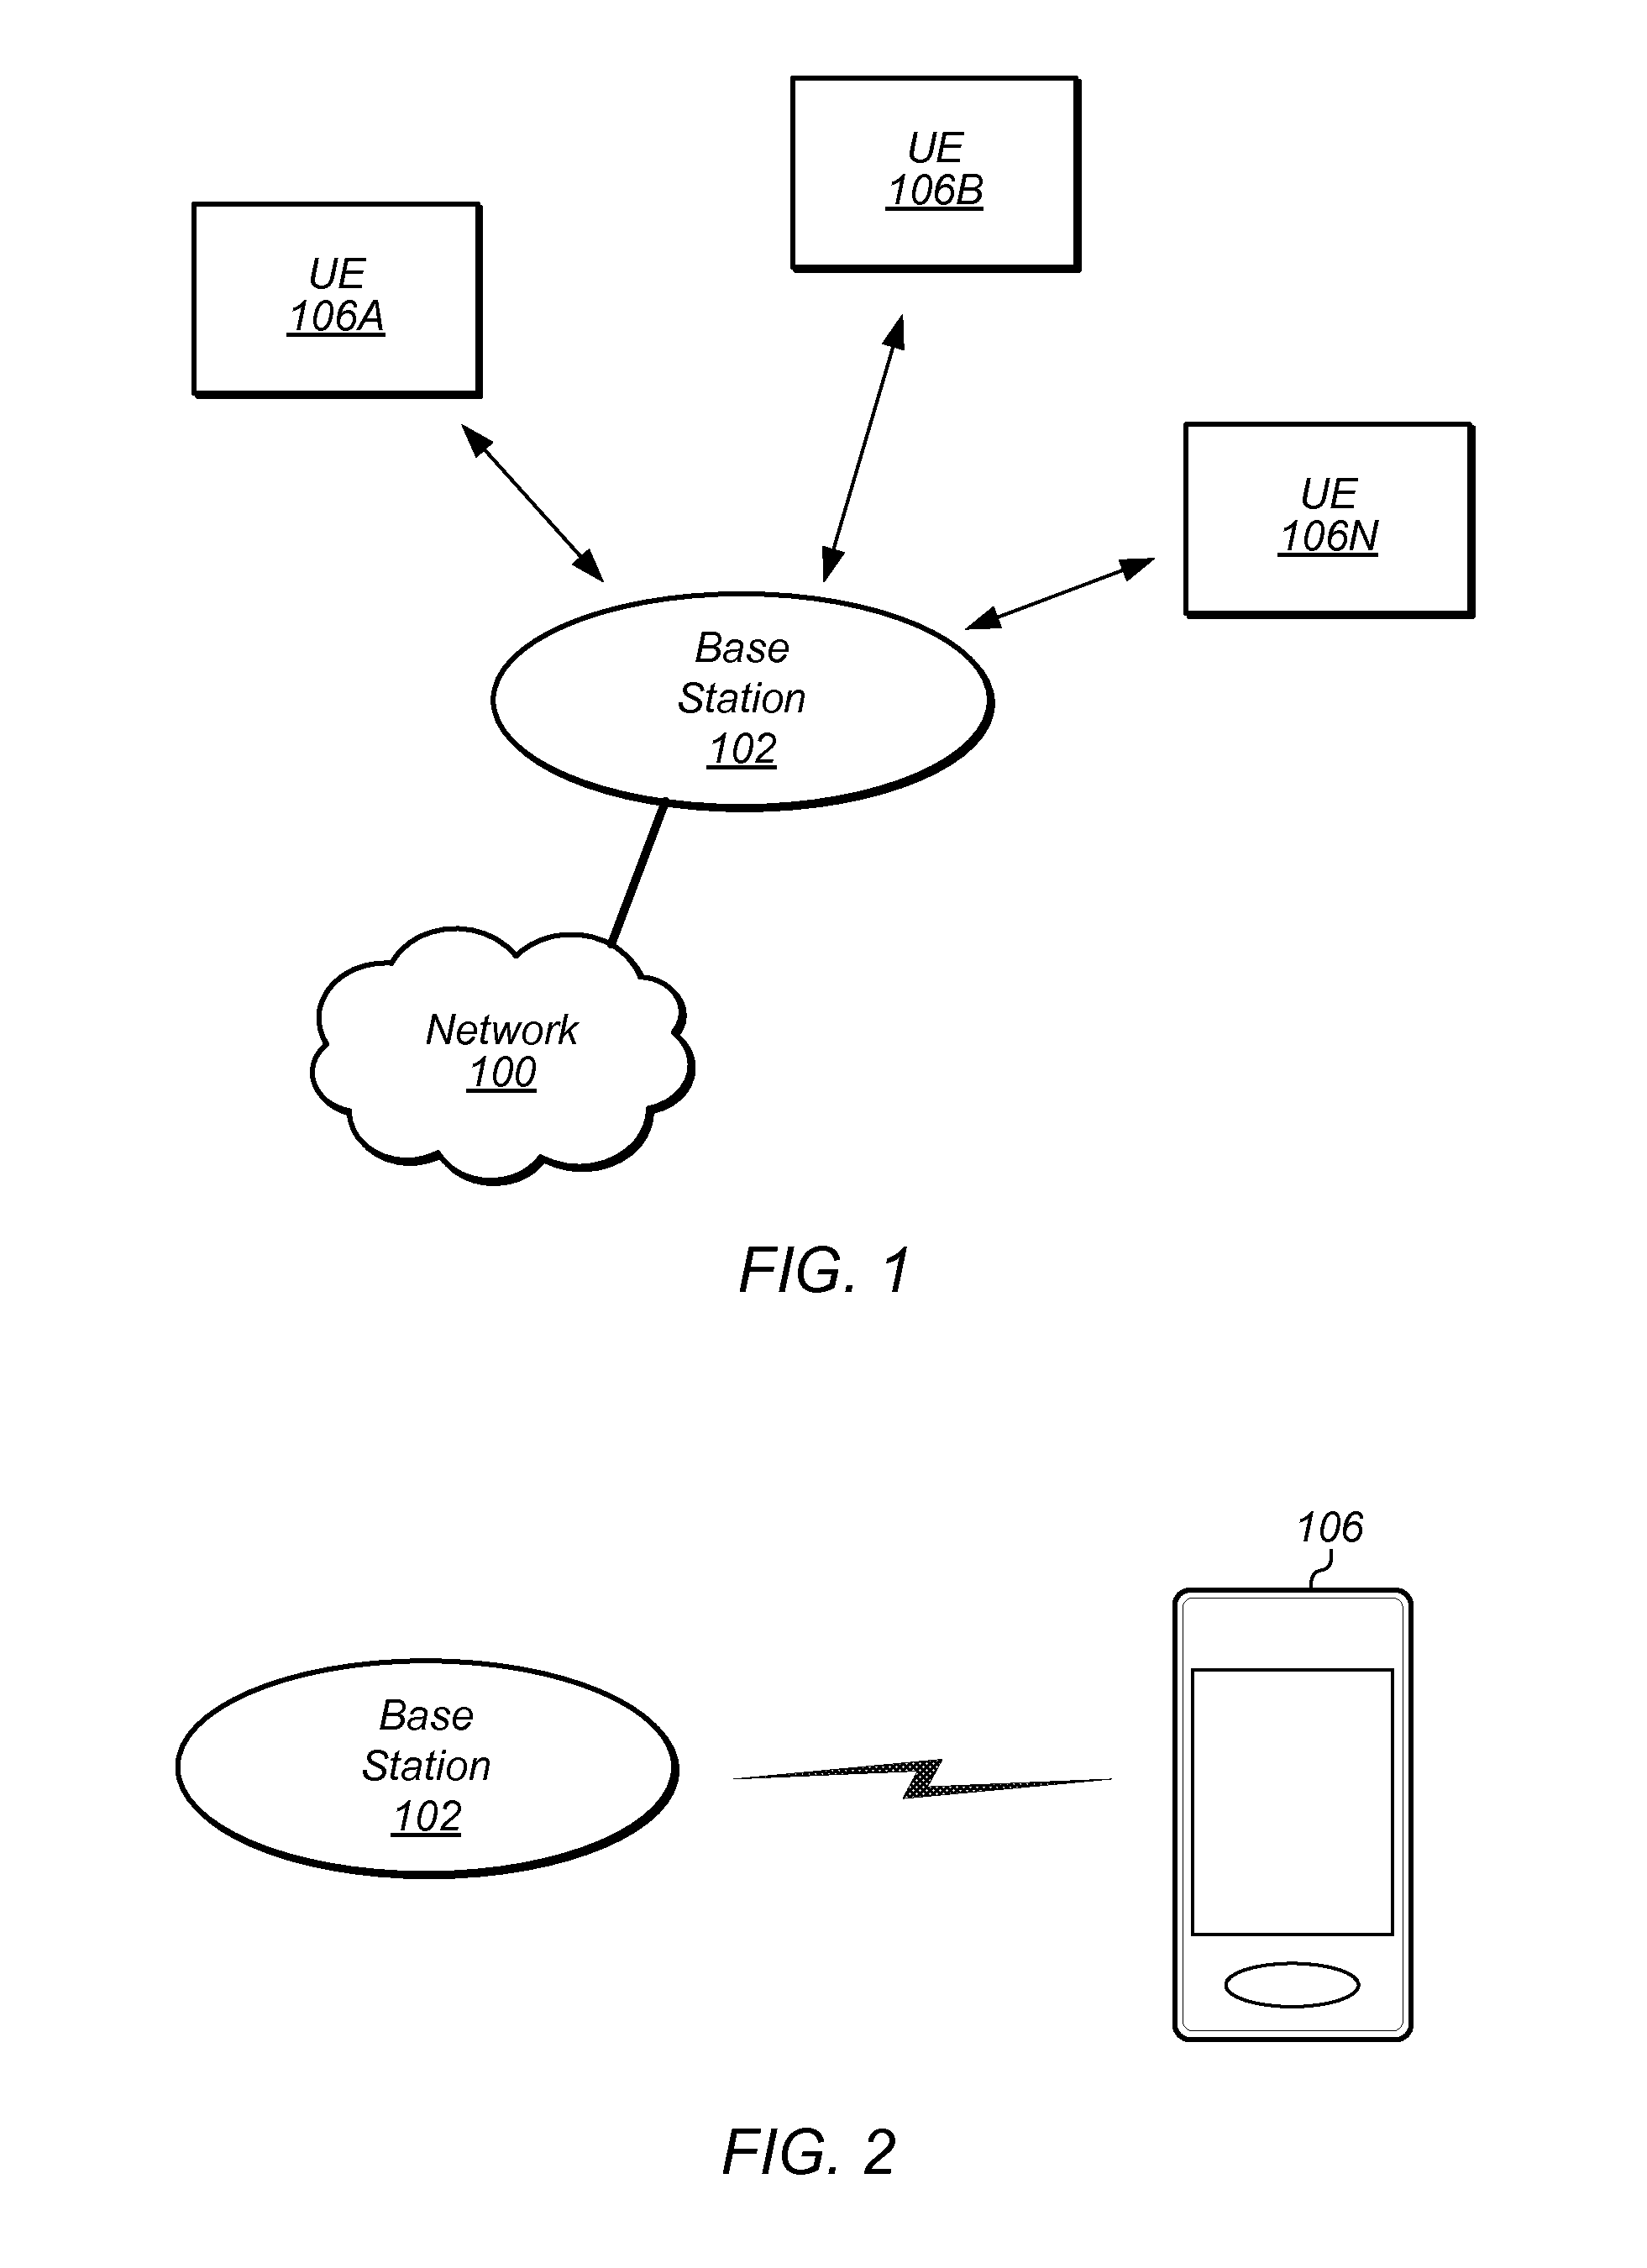 Automatically modifying wireless network connection policies based on user activity levels